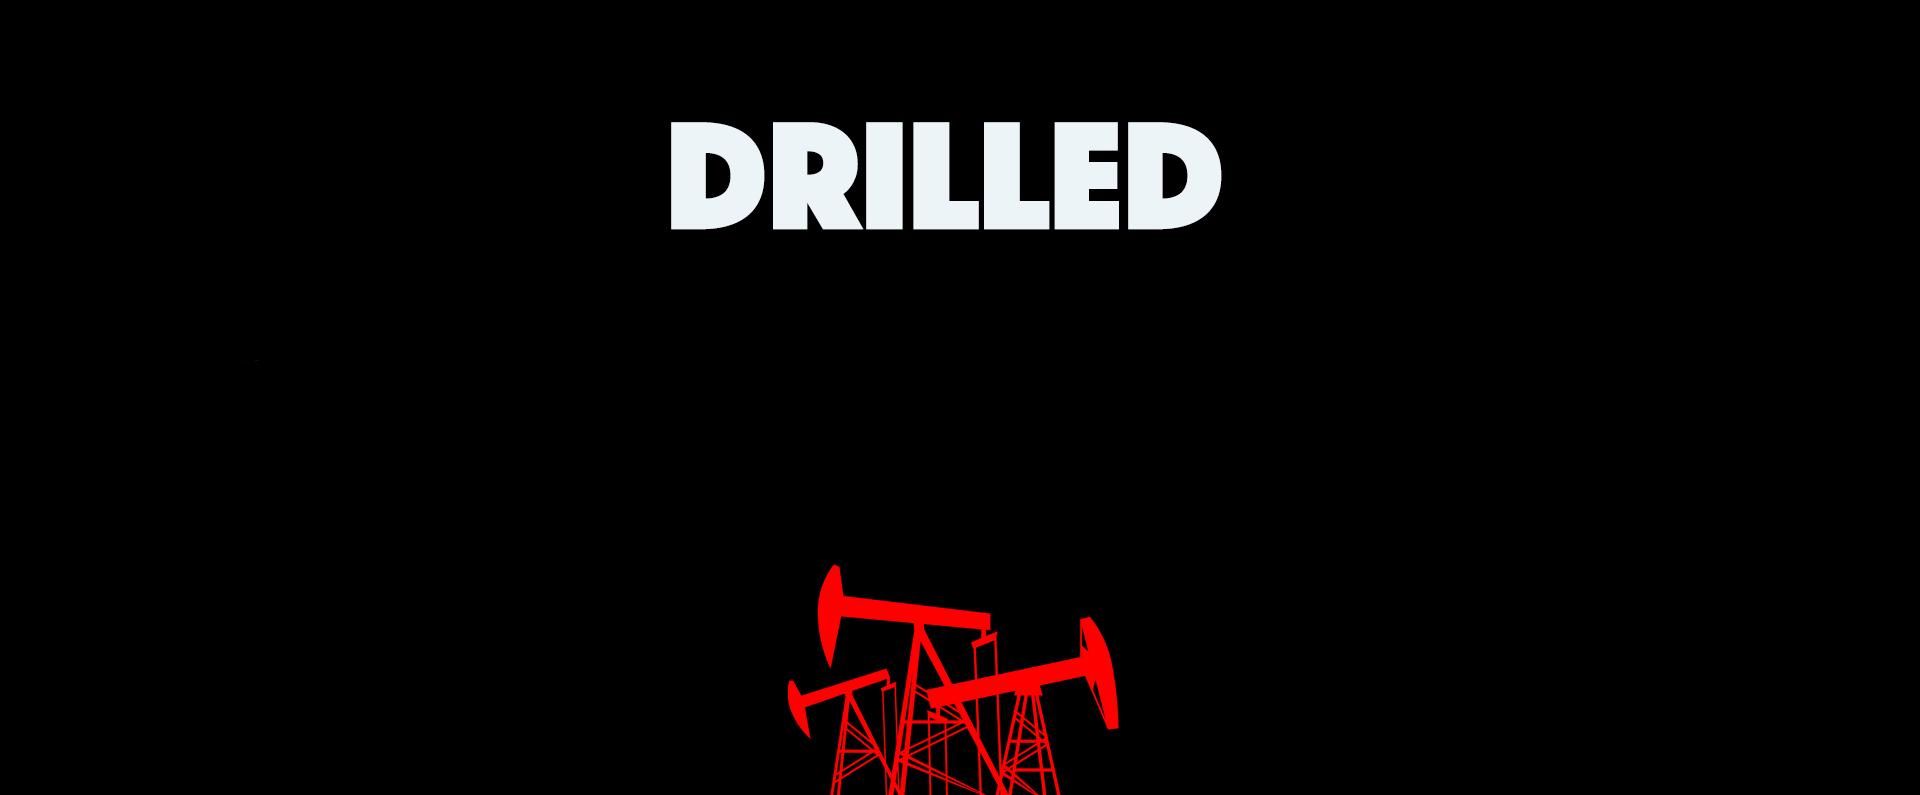 Drilled